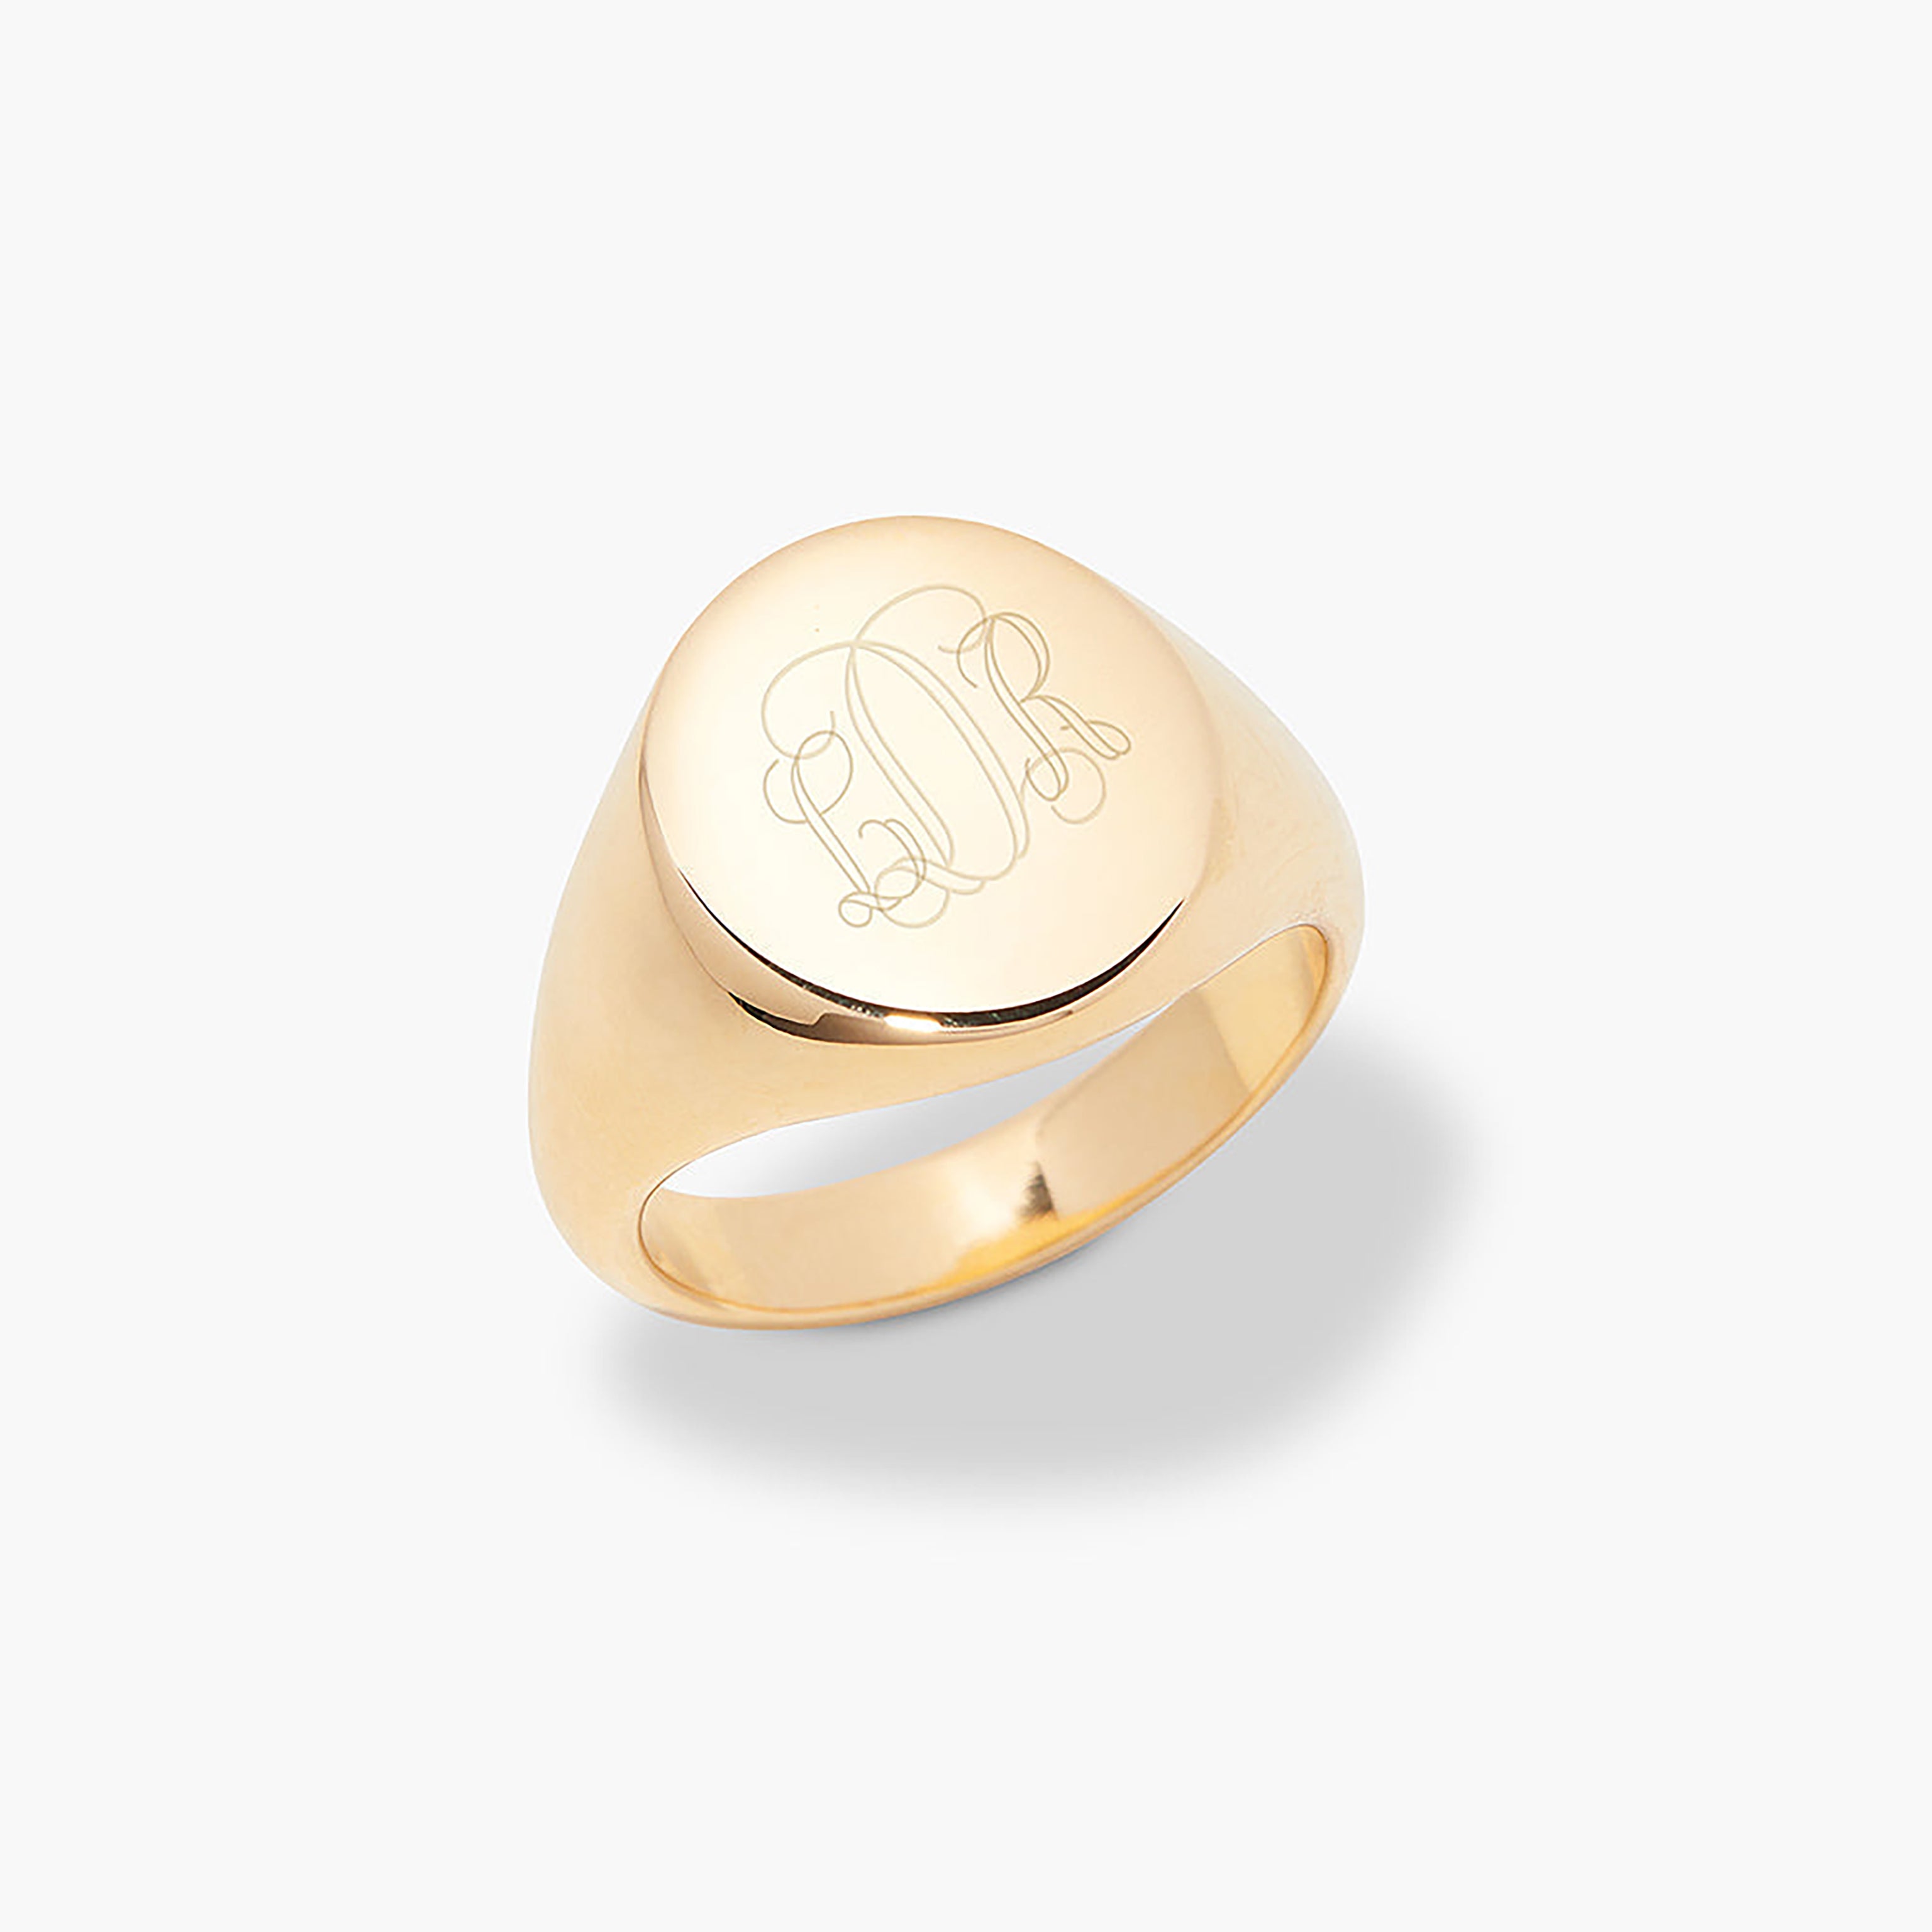 Custom Engraved Gold Initial Signet Ring - Anniversary Jewelry - Birthday Gift for Her - Monogram Ring - Christmas Gifts for Mom